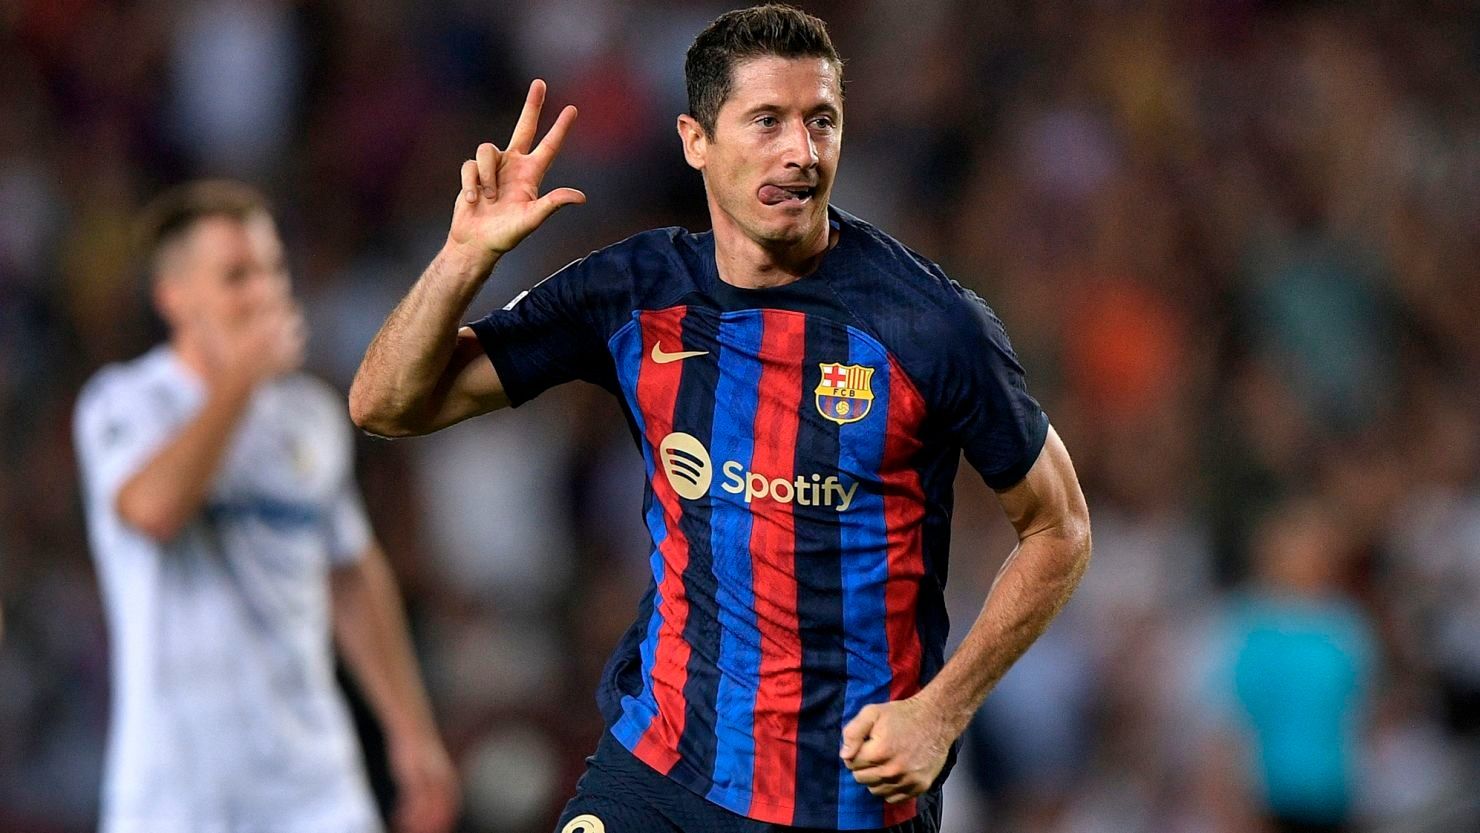 Barcelona Plan To Extend Contract With Lewandowski With A Decrease In Salary